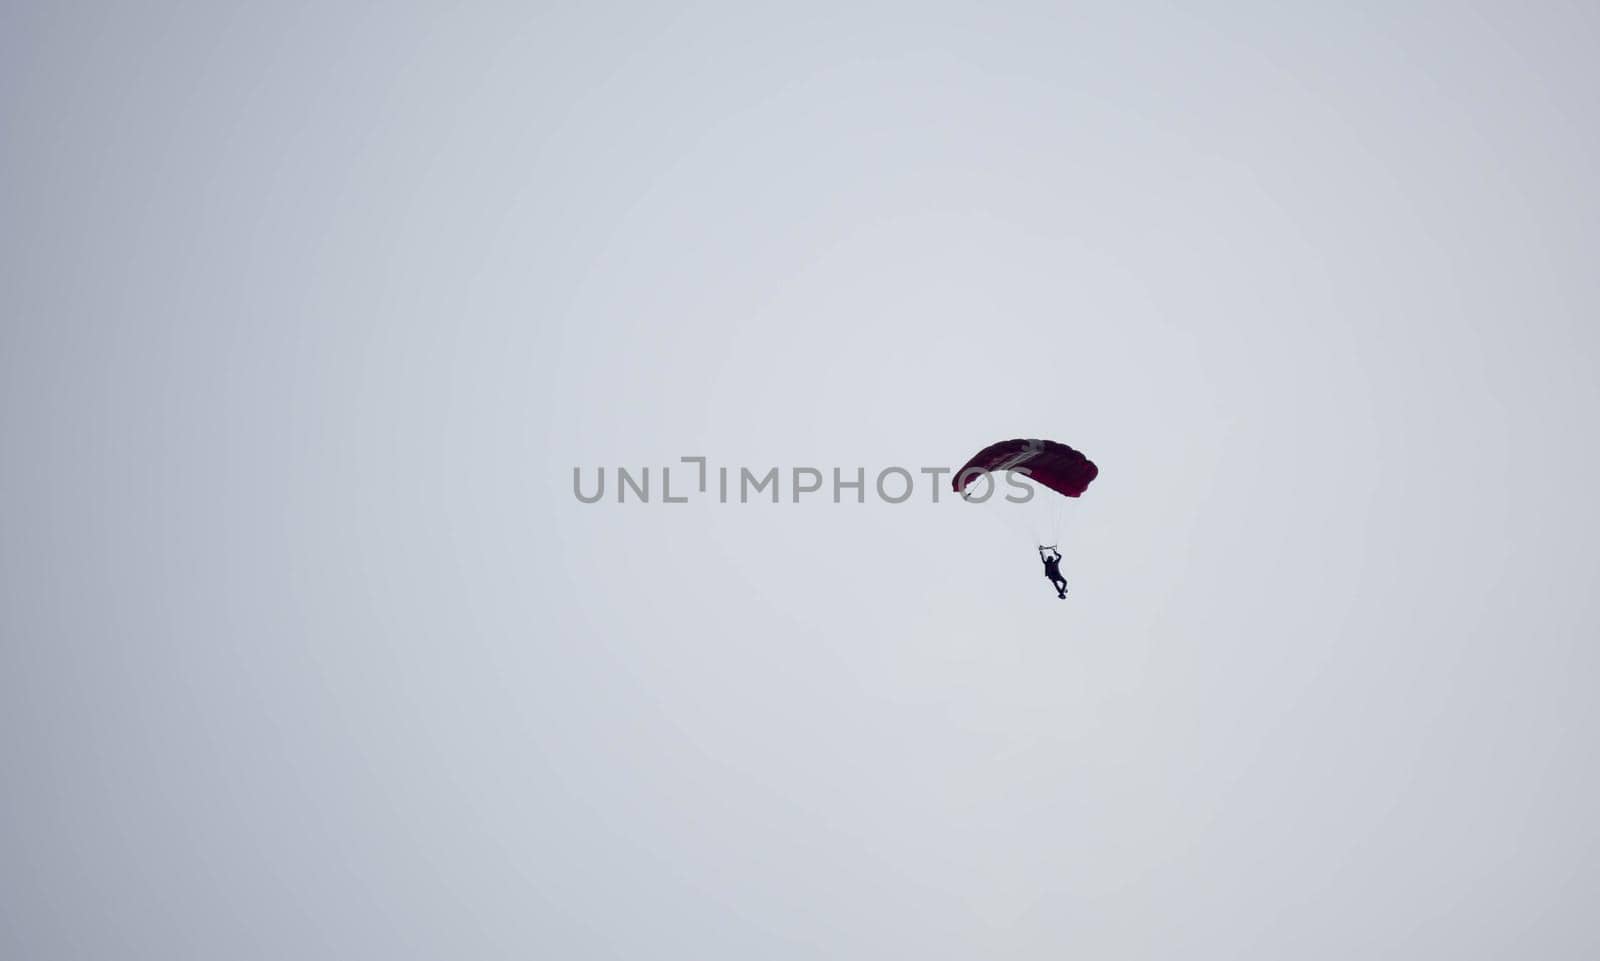 silhouette parachute stunt unfocused and blurry while gliding in the air with blue sky